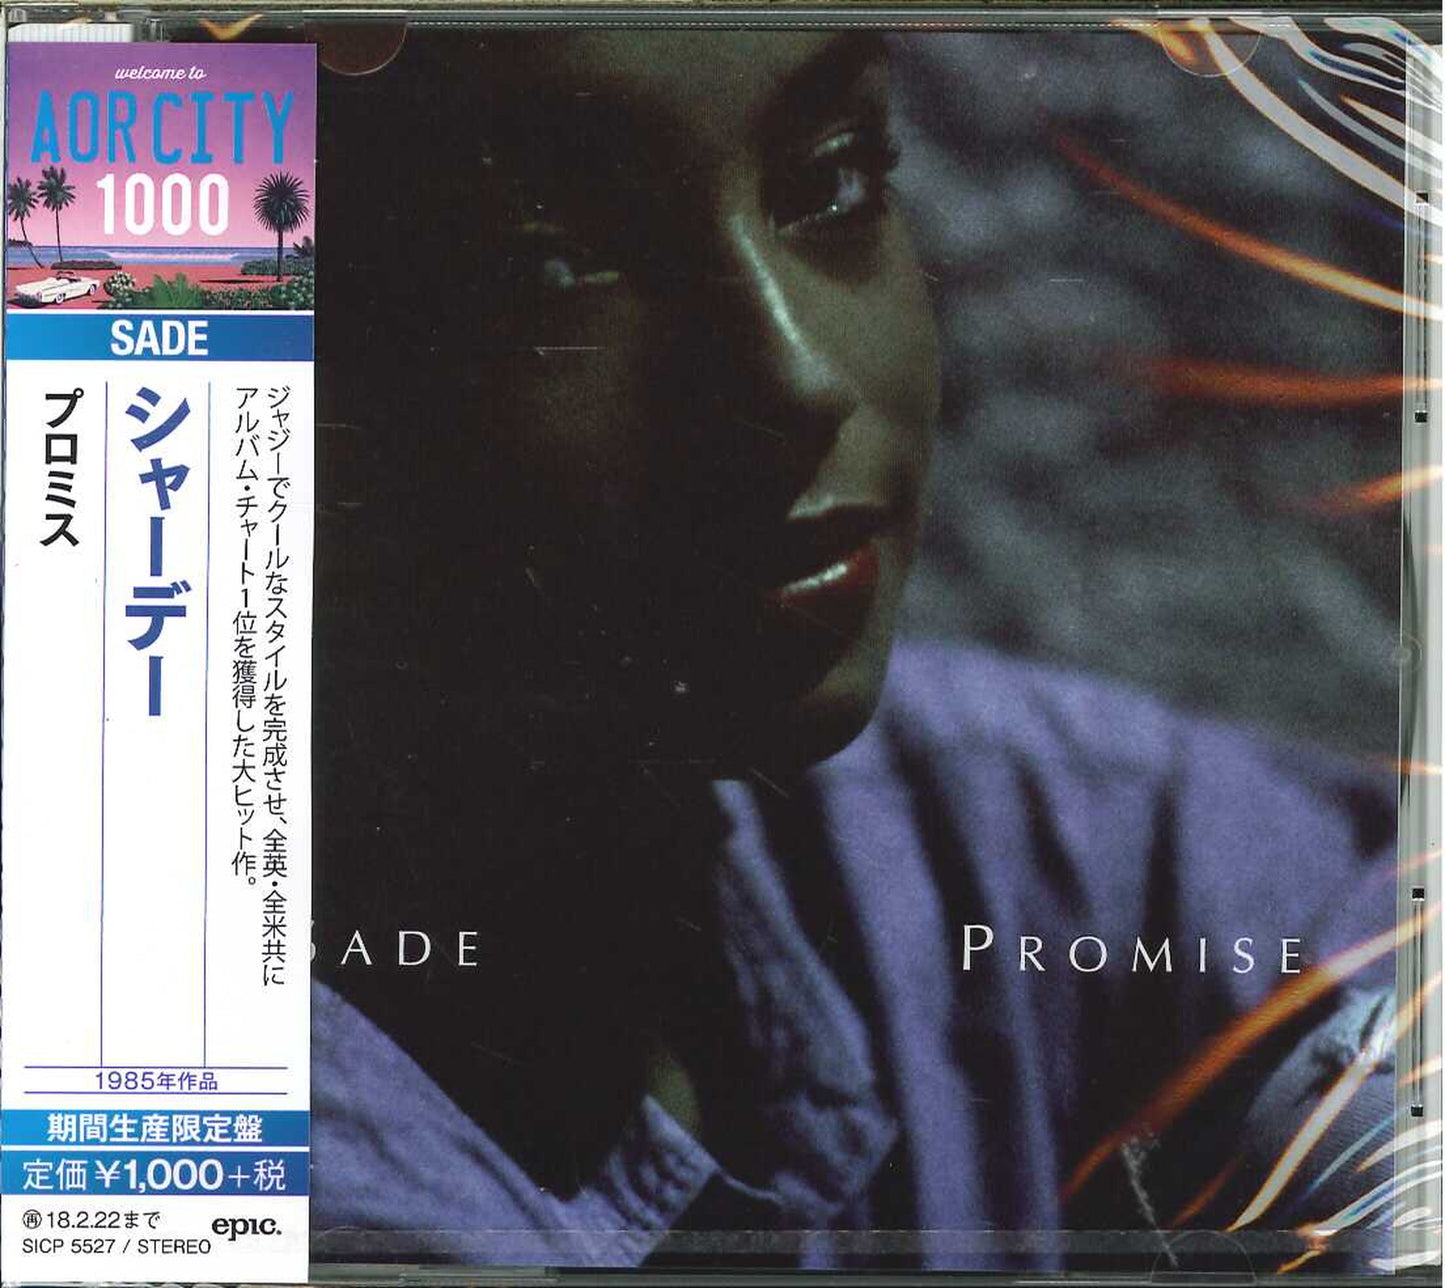 Sade - Promise - Japan  CD Limited Edition